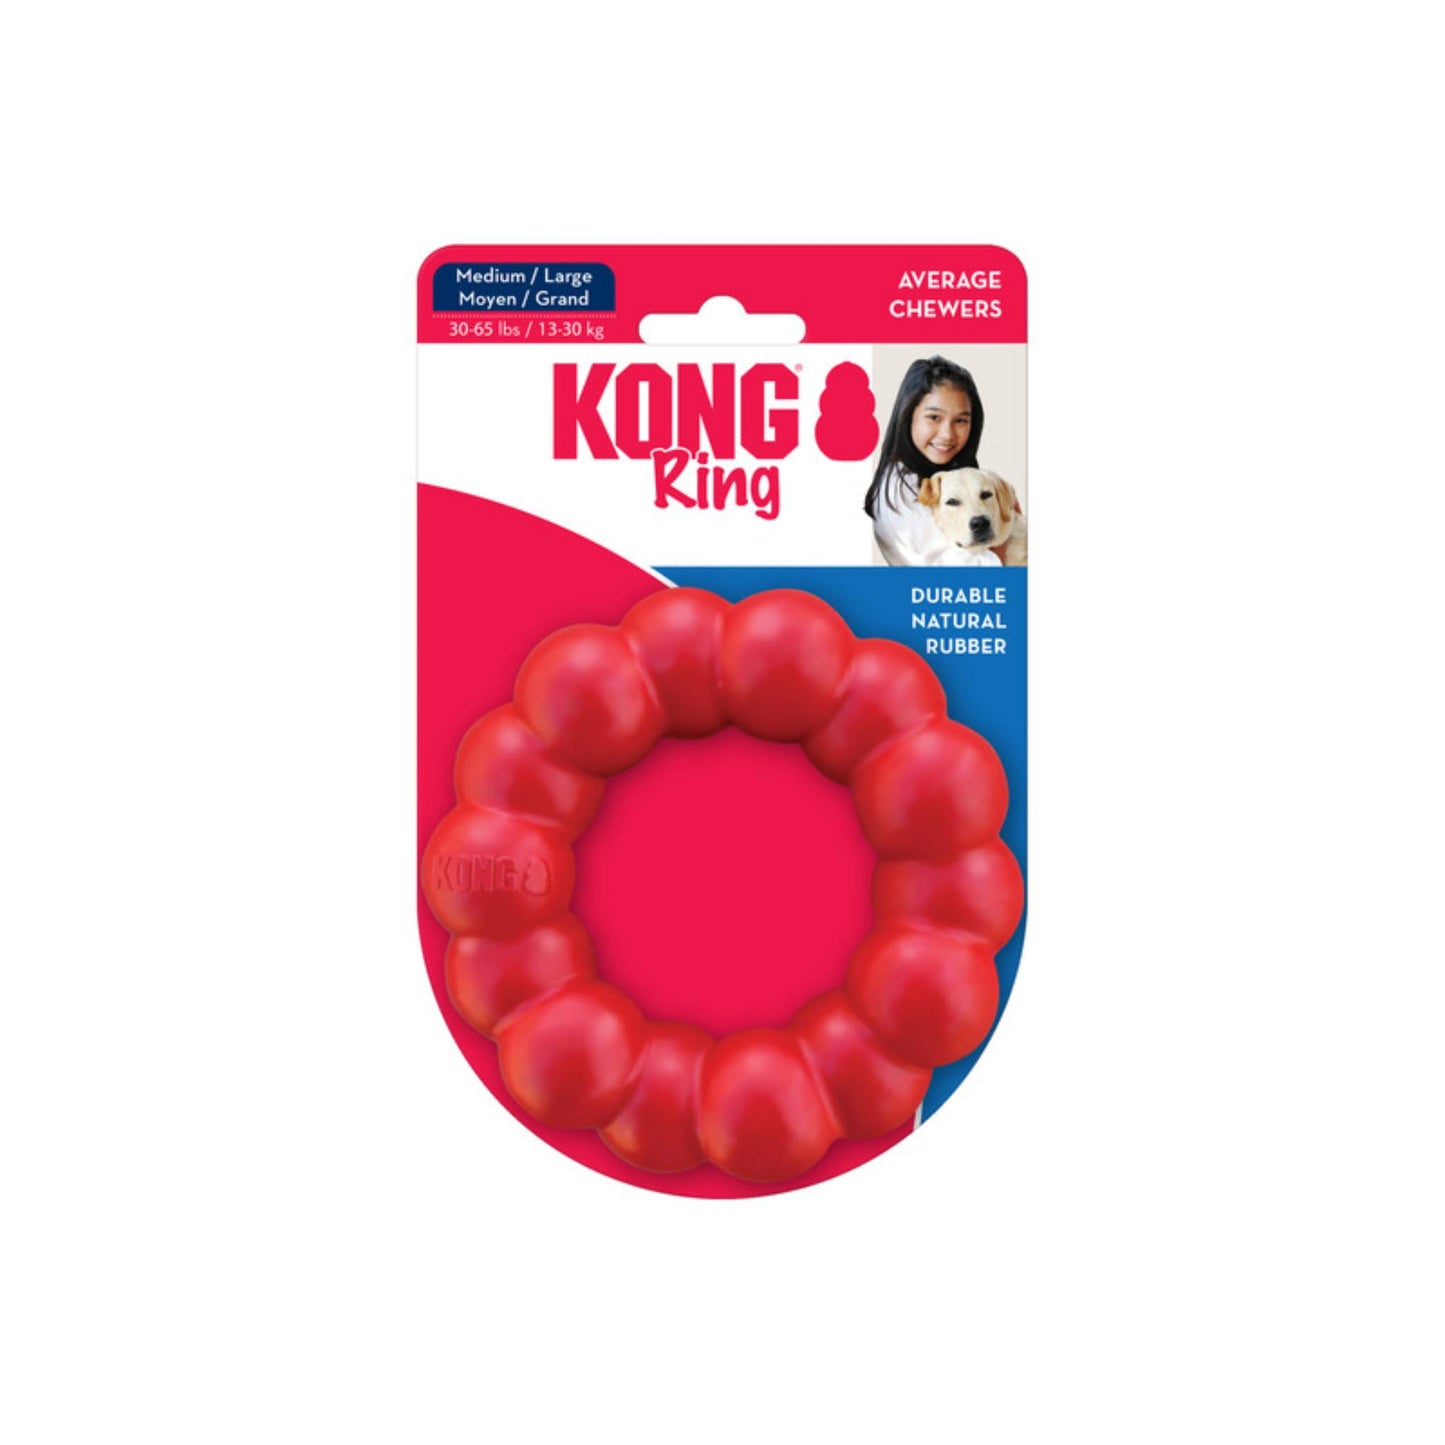 KONG Ring dog toy with label